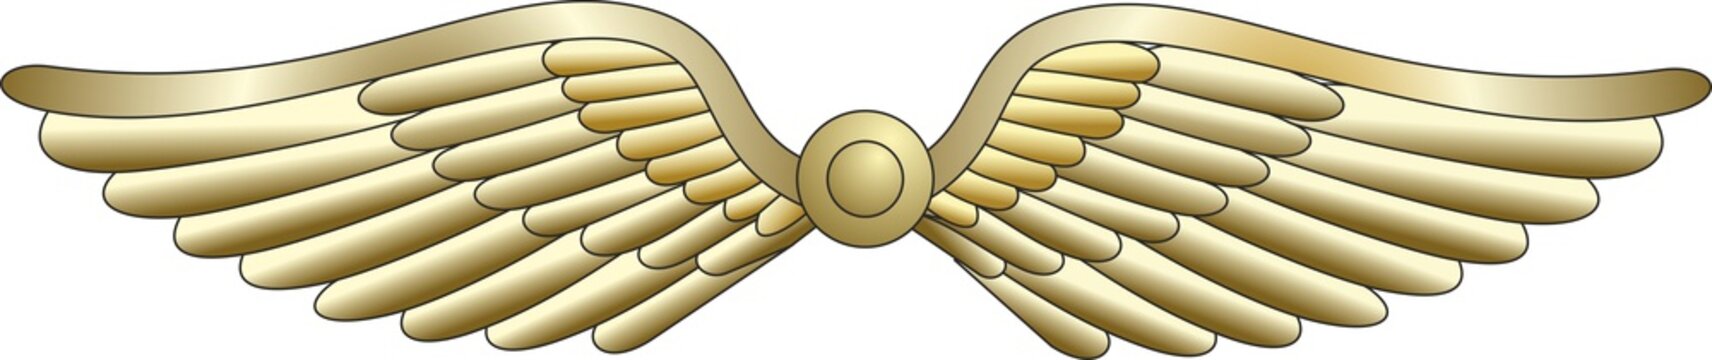 Golden metal wings, air Force insignia on a white background. Vector image.